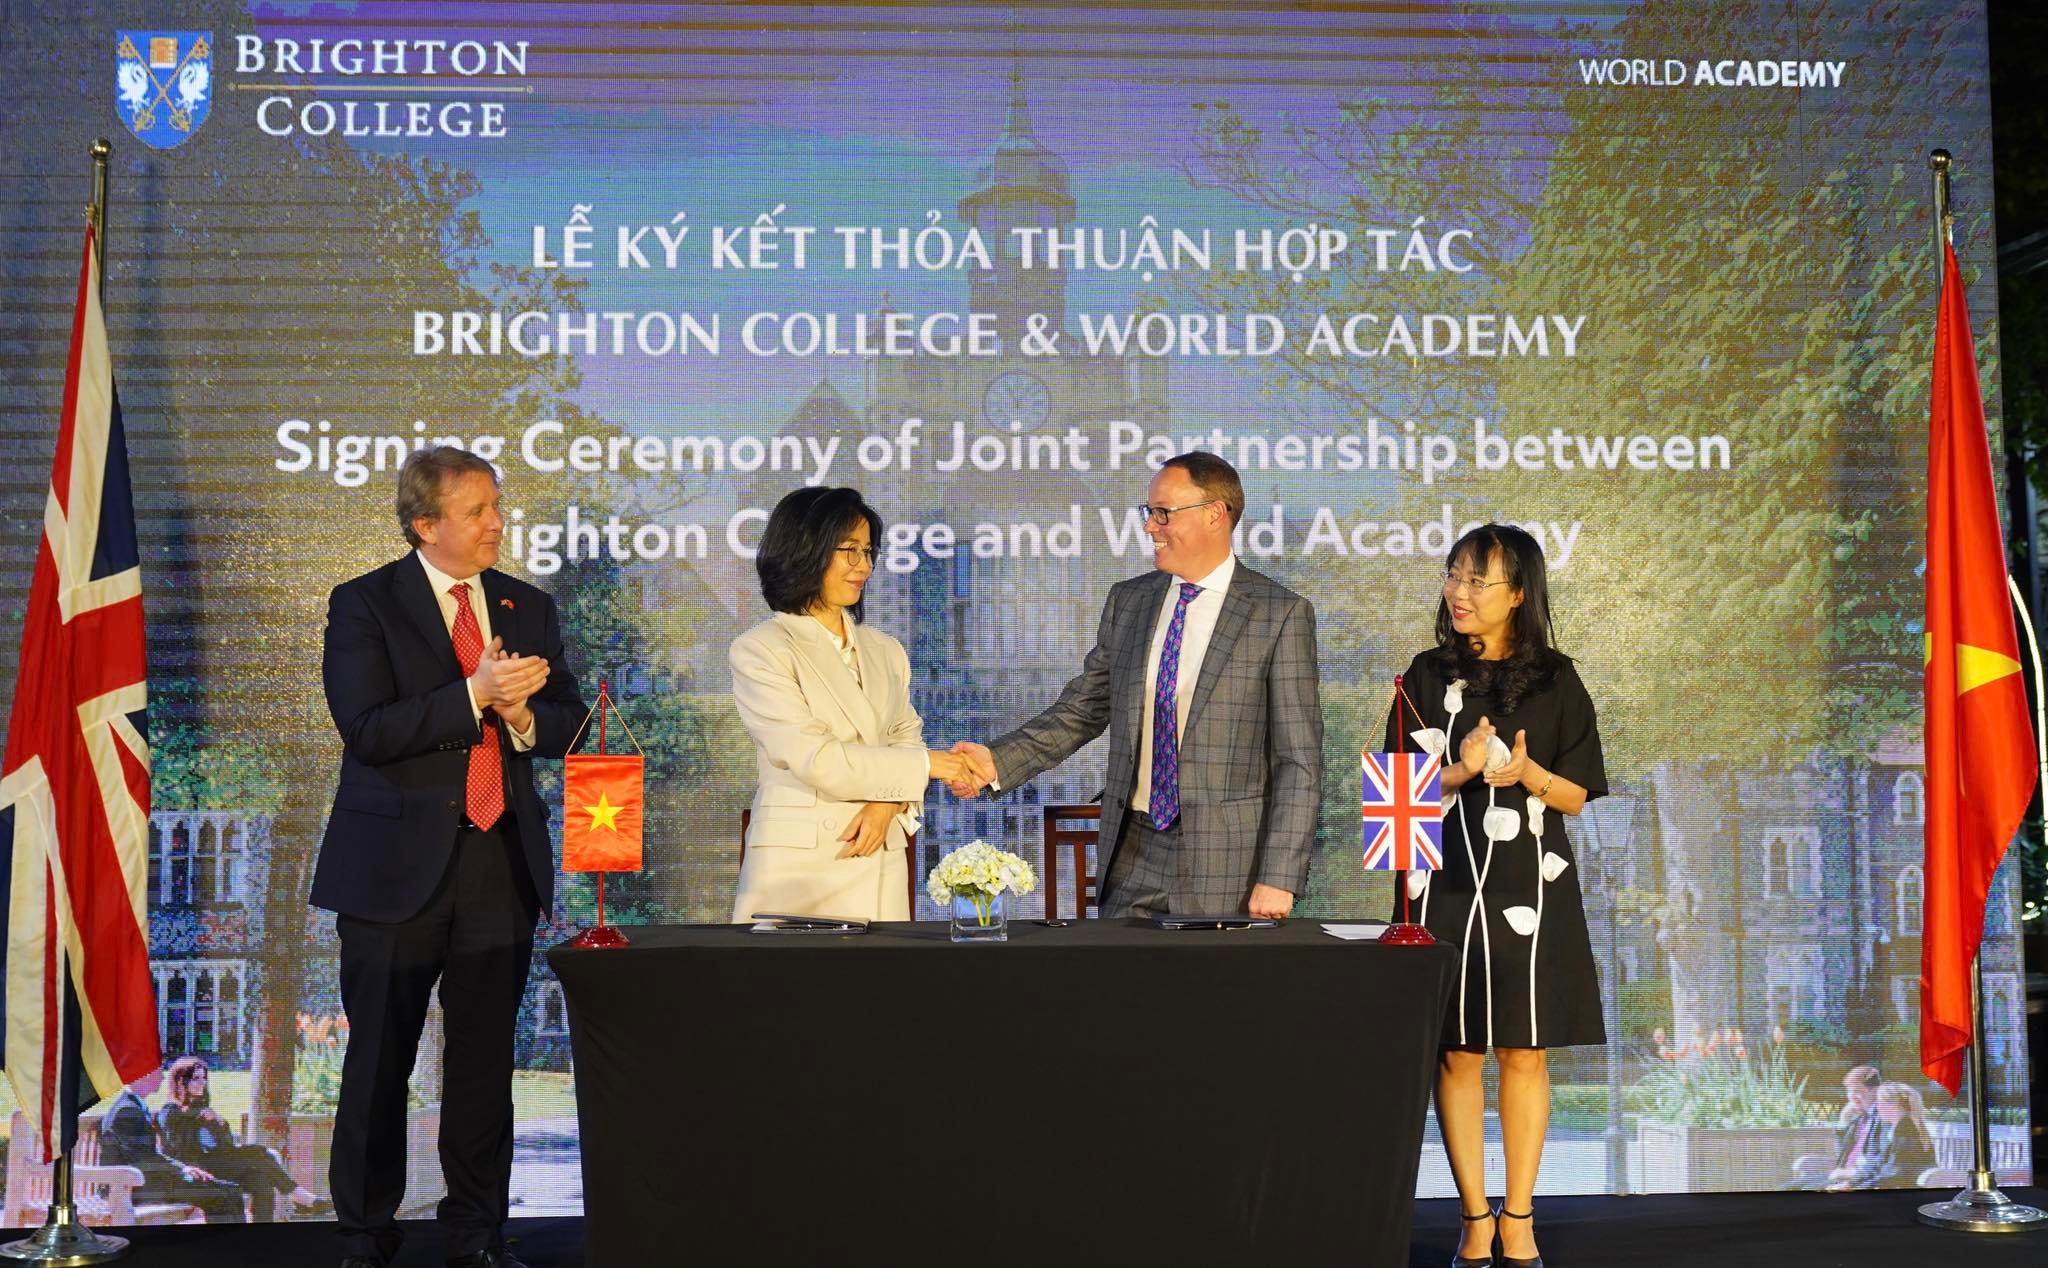 Vingroup partners with Brighton College to bring UK’s "Independent School of The Decade" to Vietnam